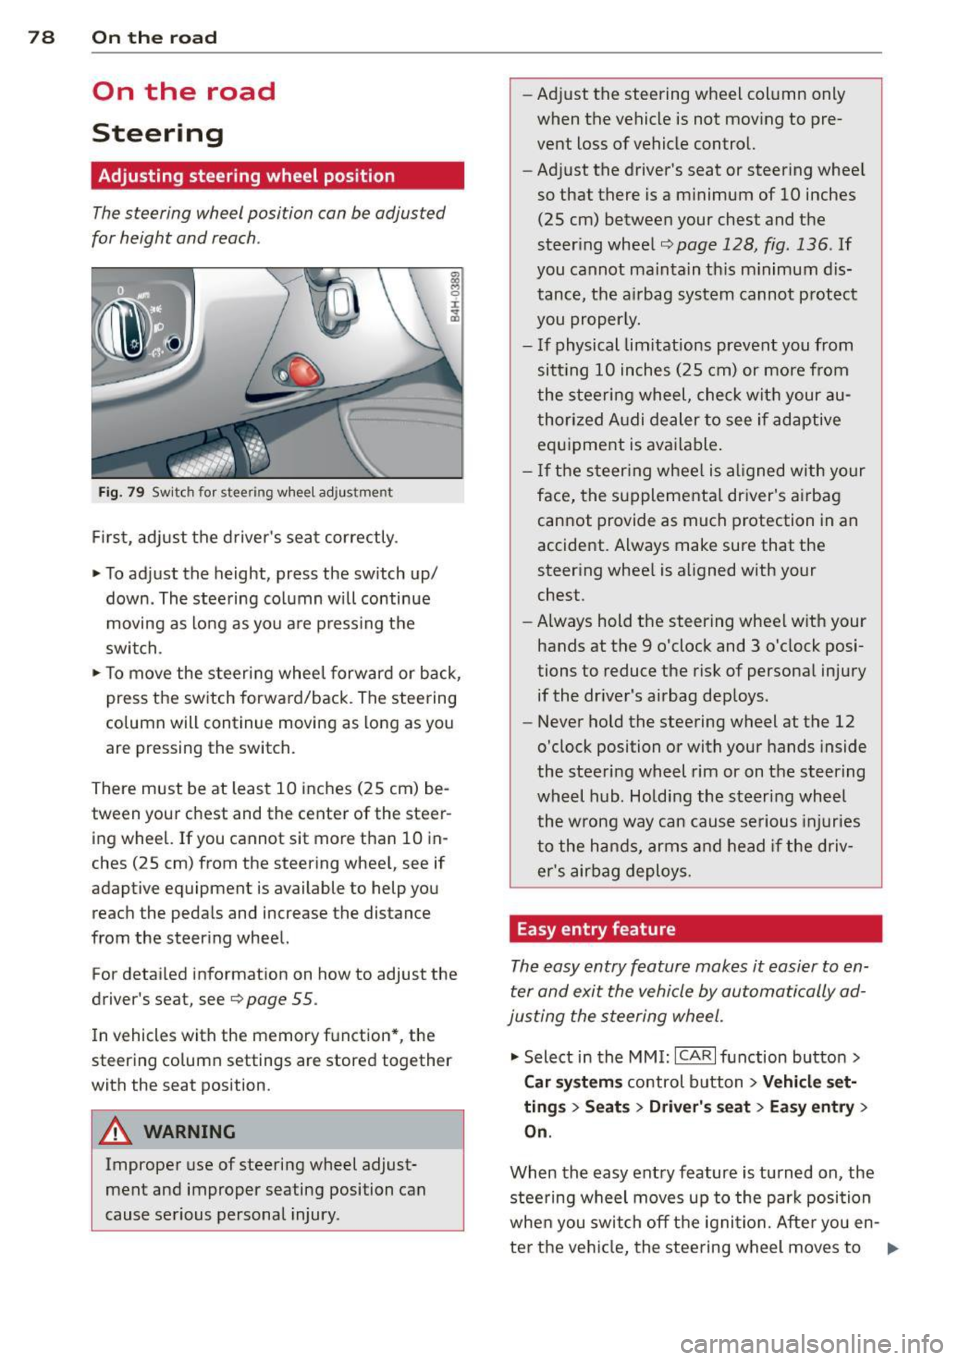 AUDI A8 2011  Owners Manual 78  On  the  road 
On  the  road 
Steering 
Adjusting  steering  wheel  position 
The steering  wheel position  can be adjusted 
for height  and  reach . 
Fig. 79 Switch  for steer ing  wheel  adjustm